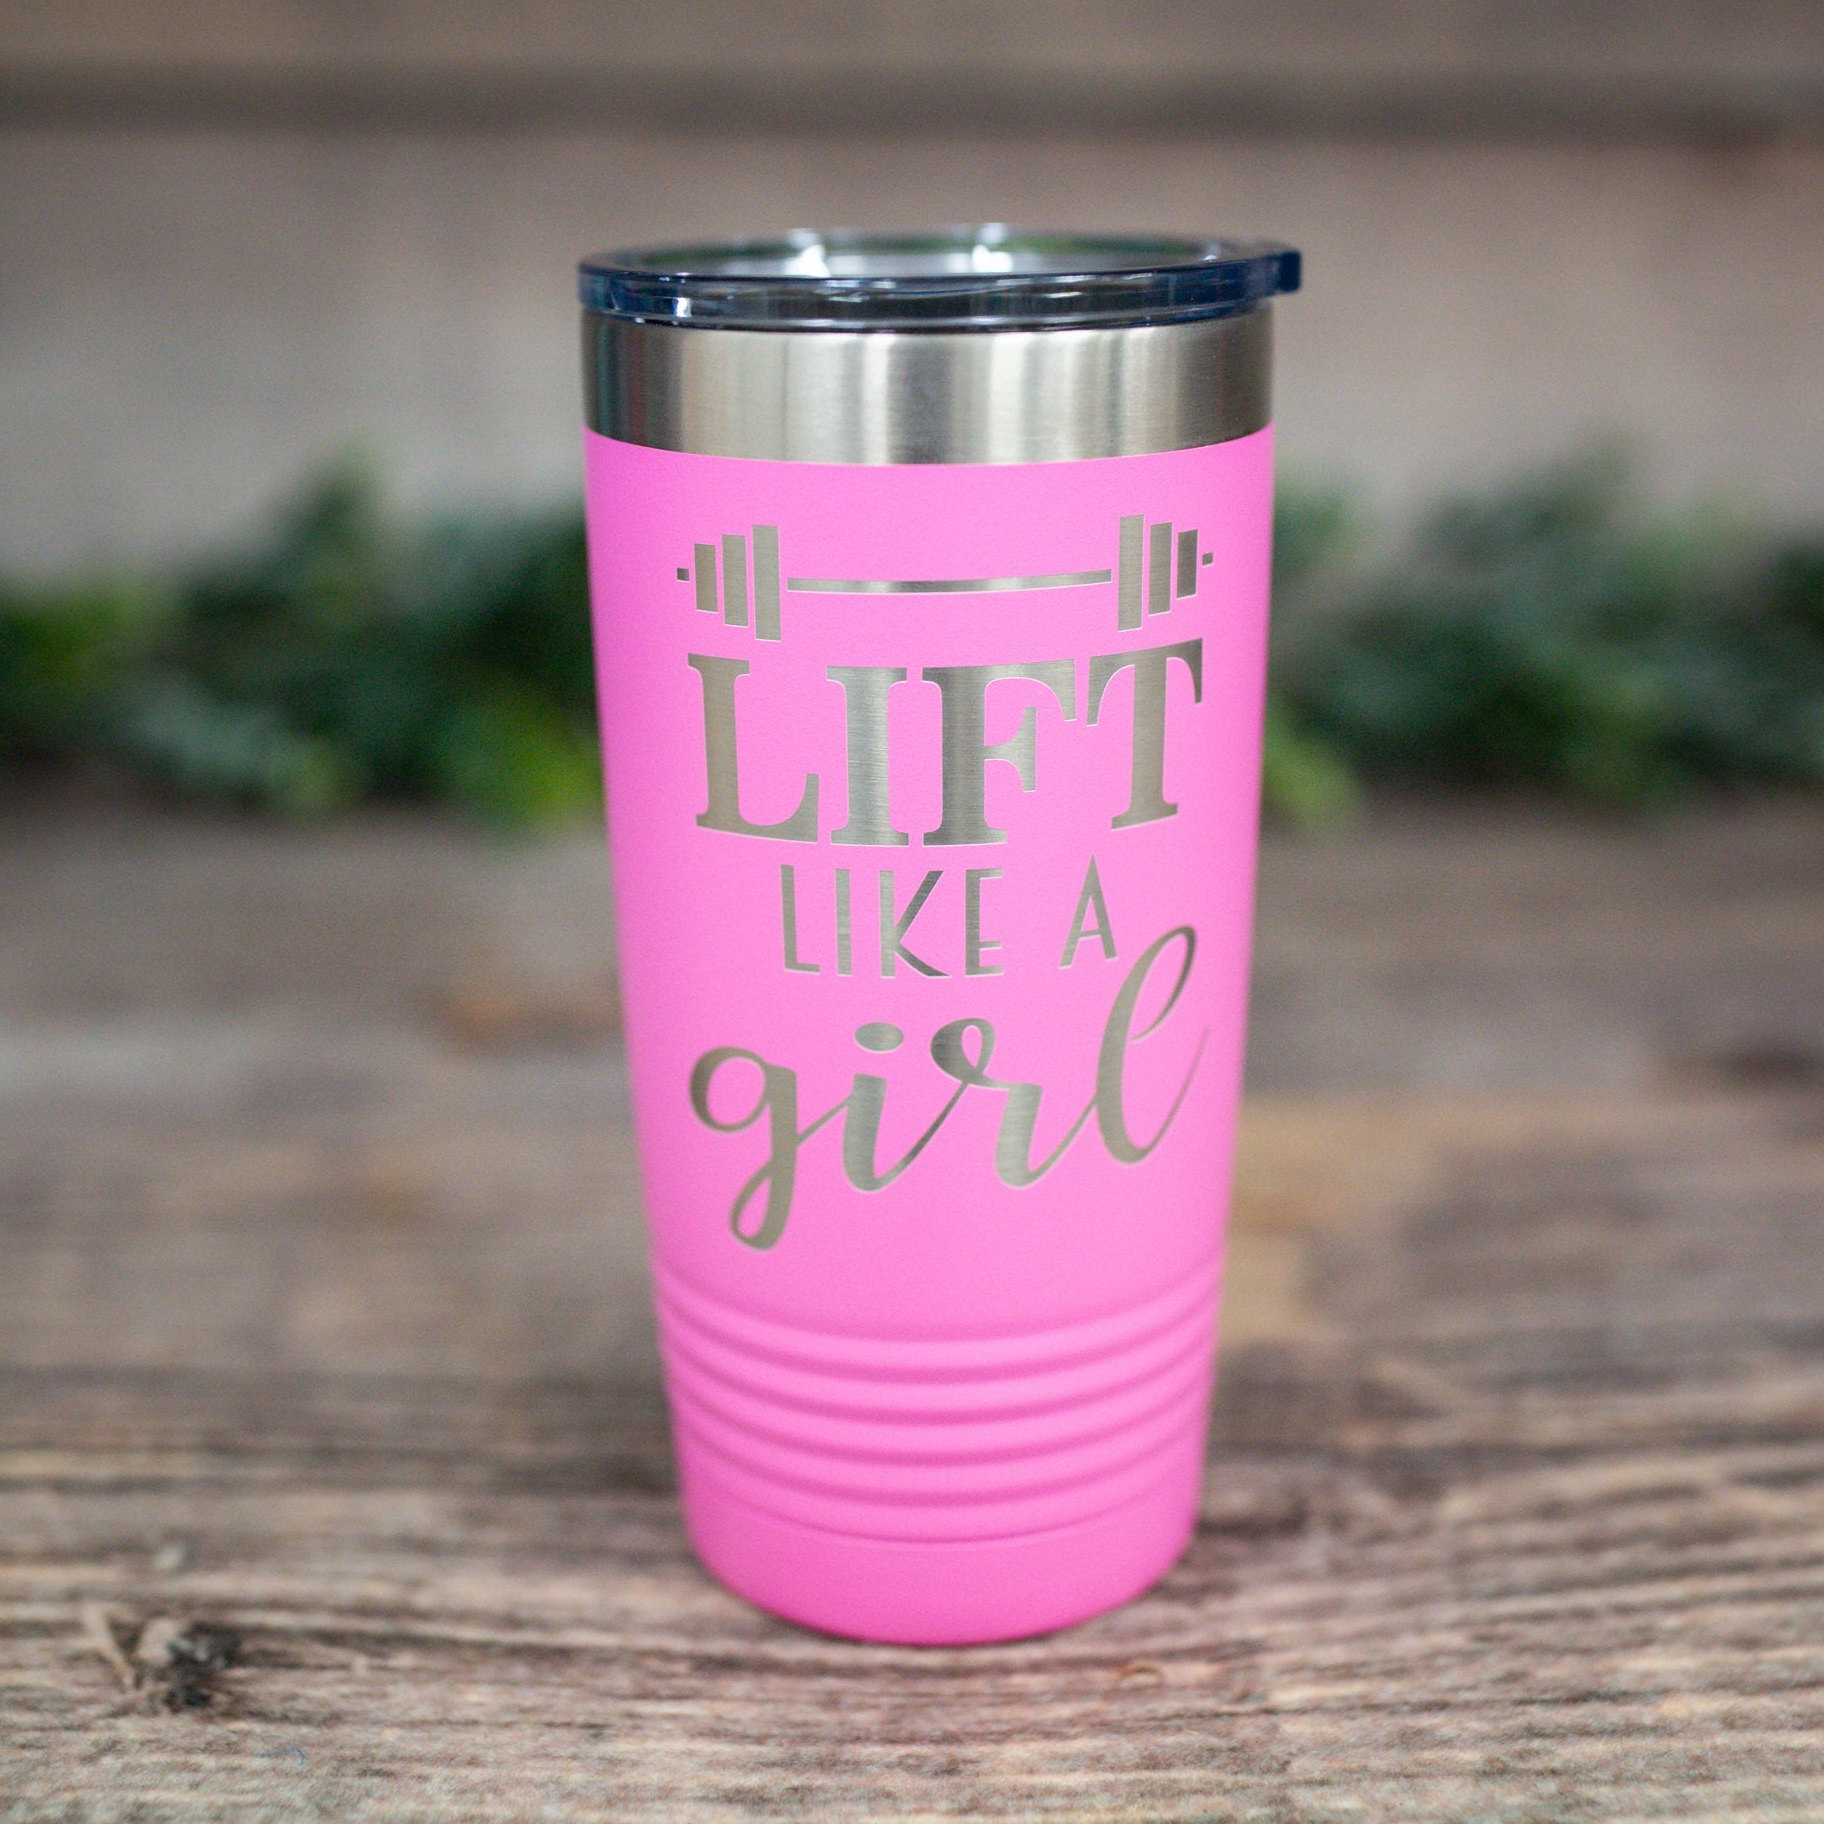 Shut Up And Lift – Engraved Weightlifting Tumbler, Funny Workout